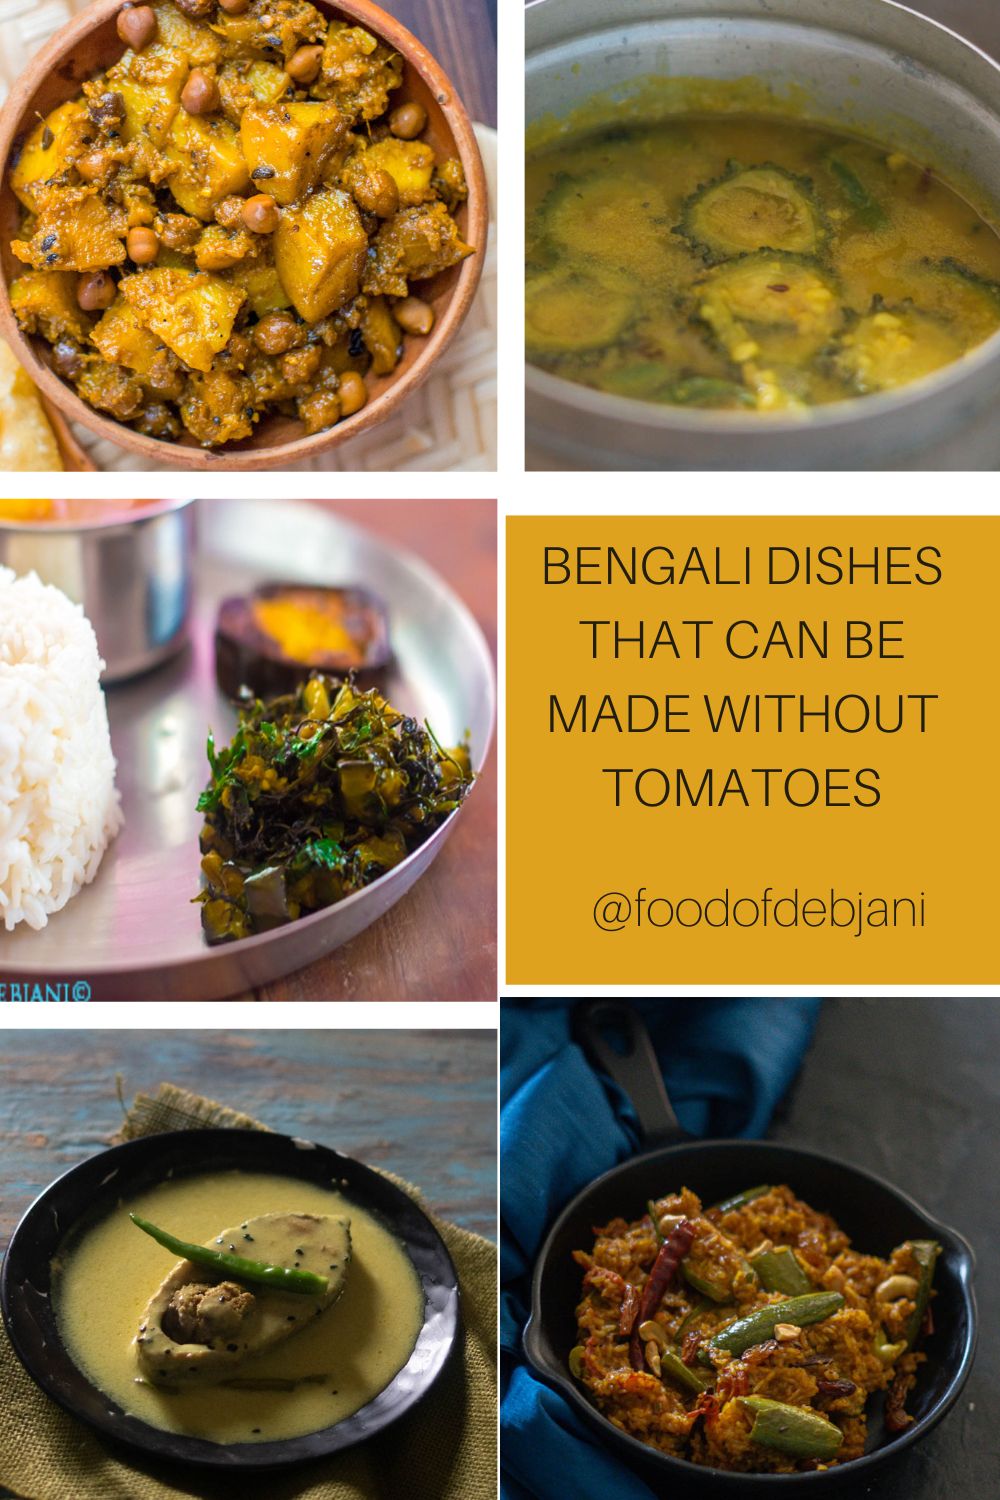 %Bengali dishes that can be made without Tomatoes Collage Pinterest Pin